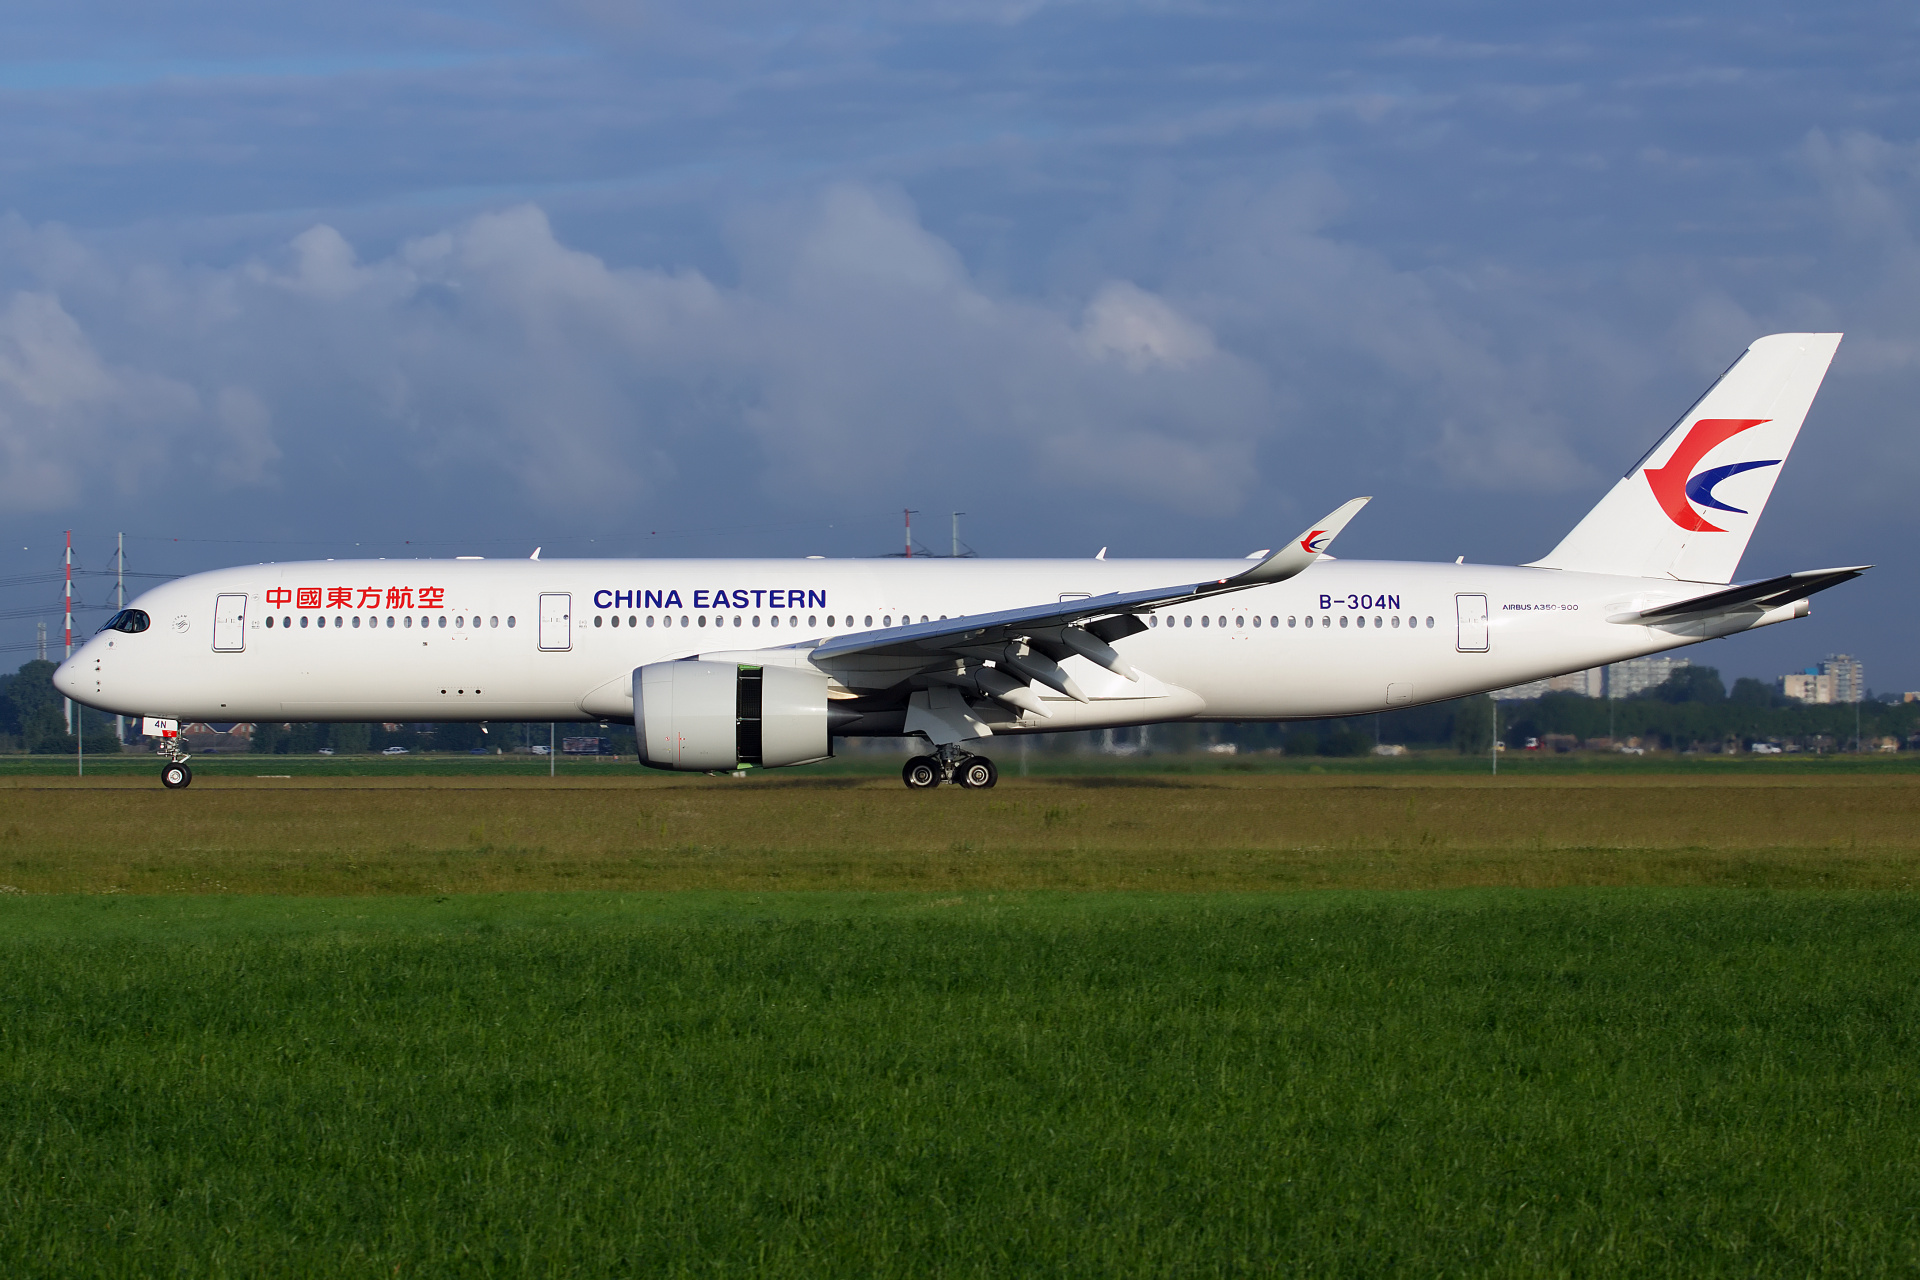 B-304N, China Eastern Airlines (Aircraft » Schiphol Spotting » Airbus A350-900)